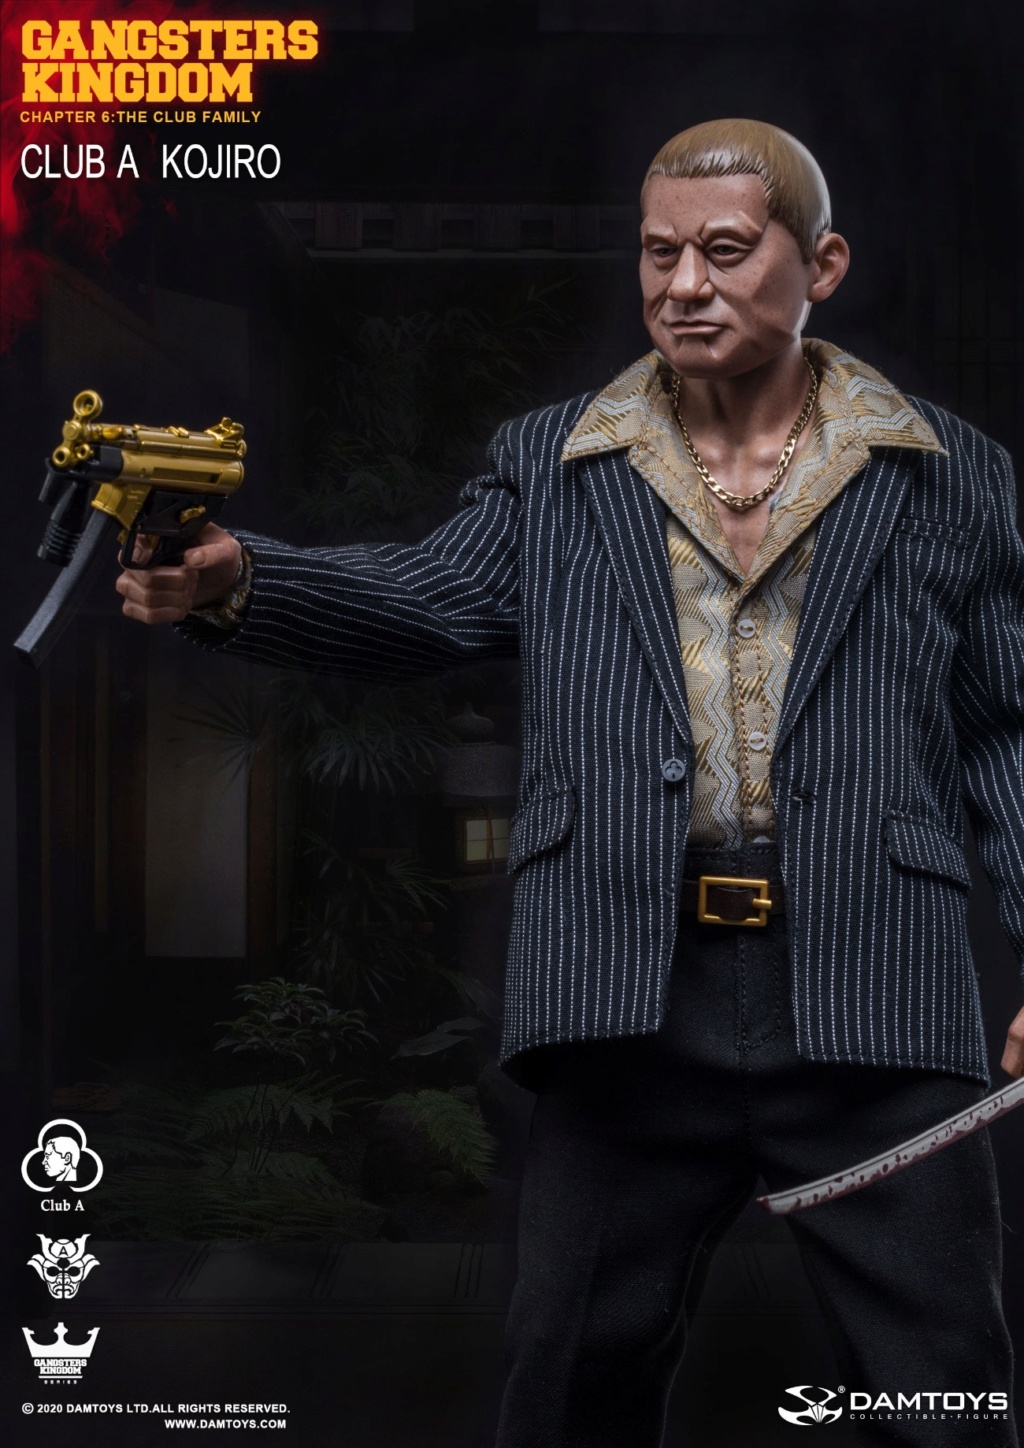 Stylized - NEW PRODUCT: DamToys: 1/6 Gangster Kingdom-Grass Flower A KOJIRO Action Figure & Coffee Table Accessory Bag #GK021 15303911